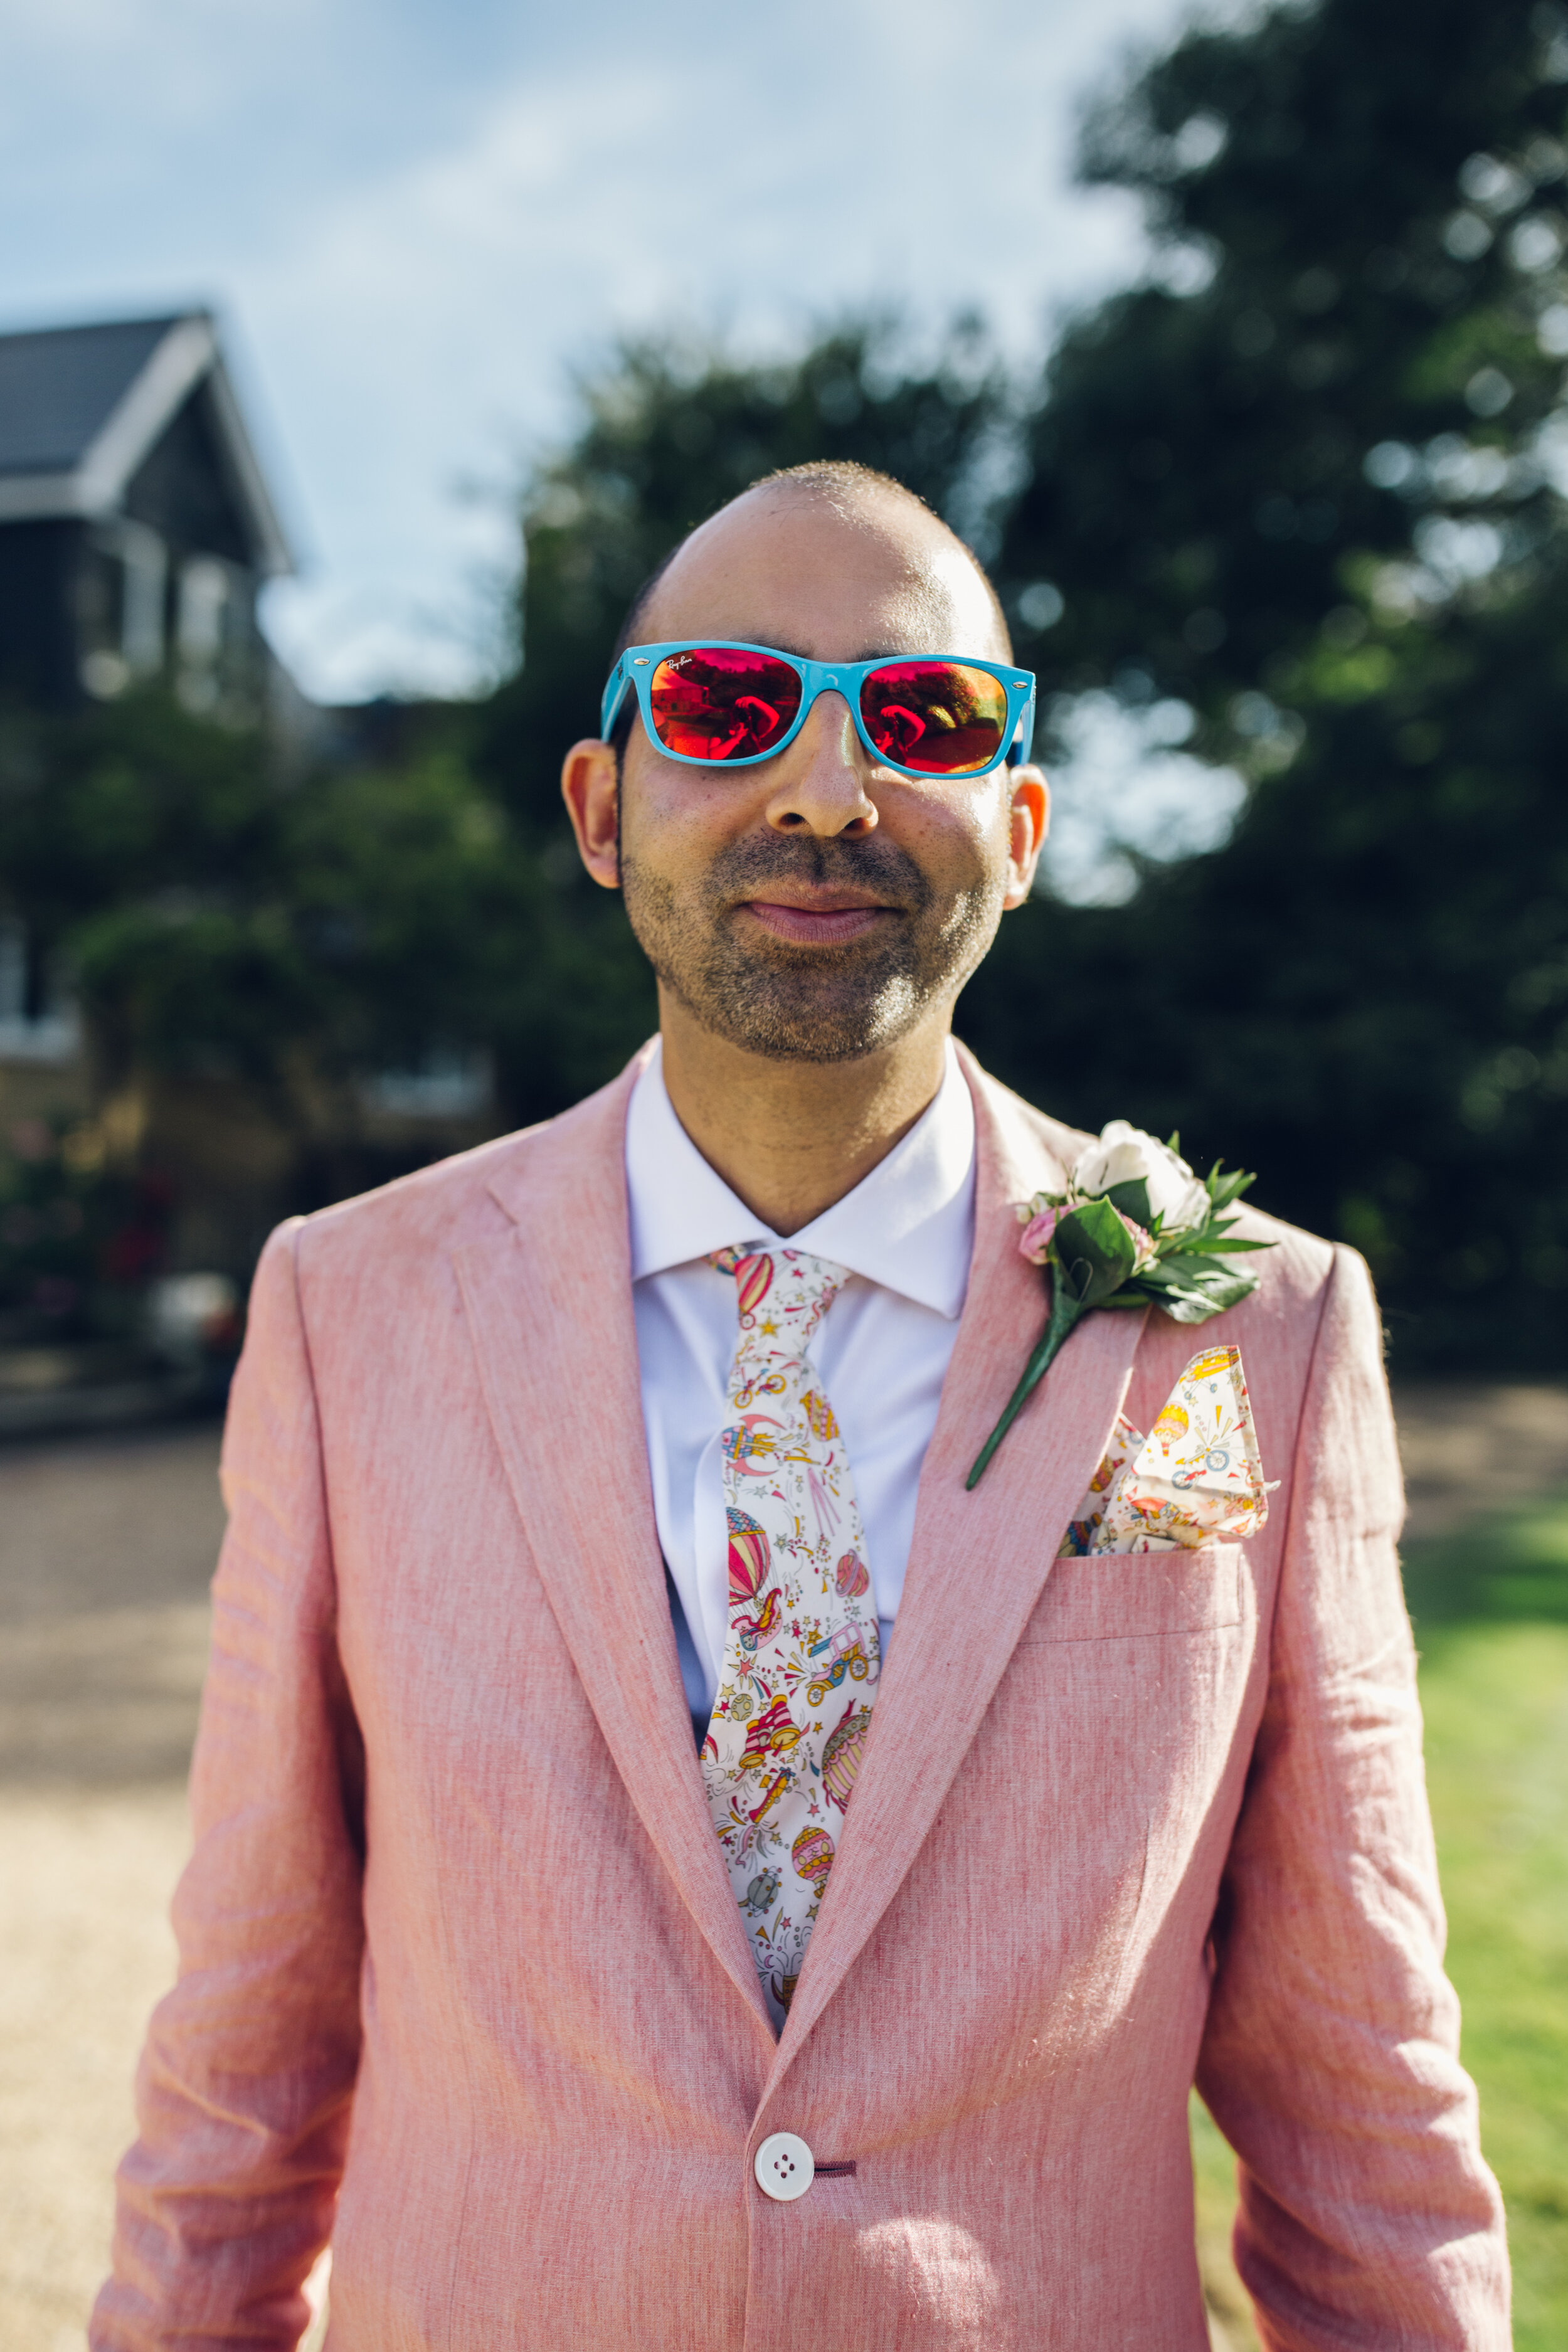 Colourful Wedding Photography - Groom Wearing Pink Suit